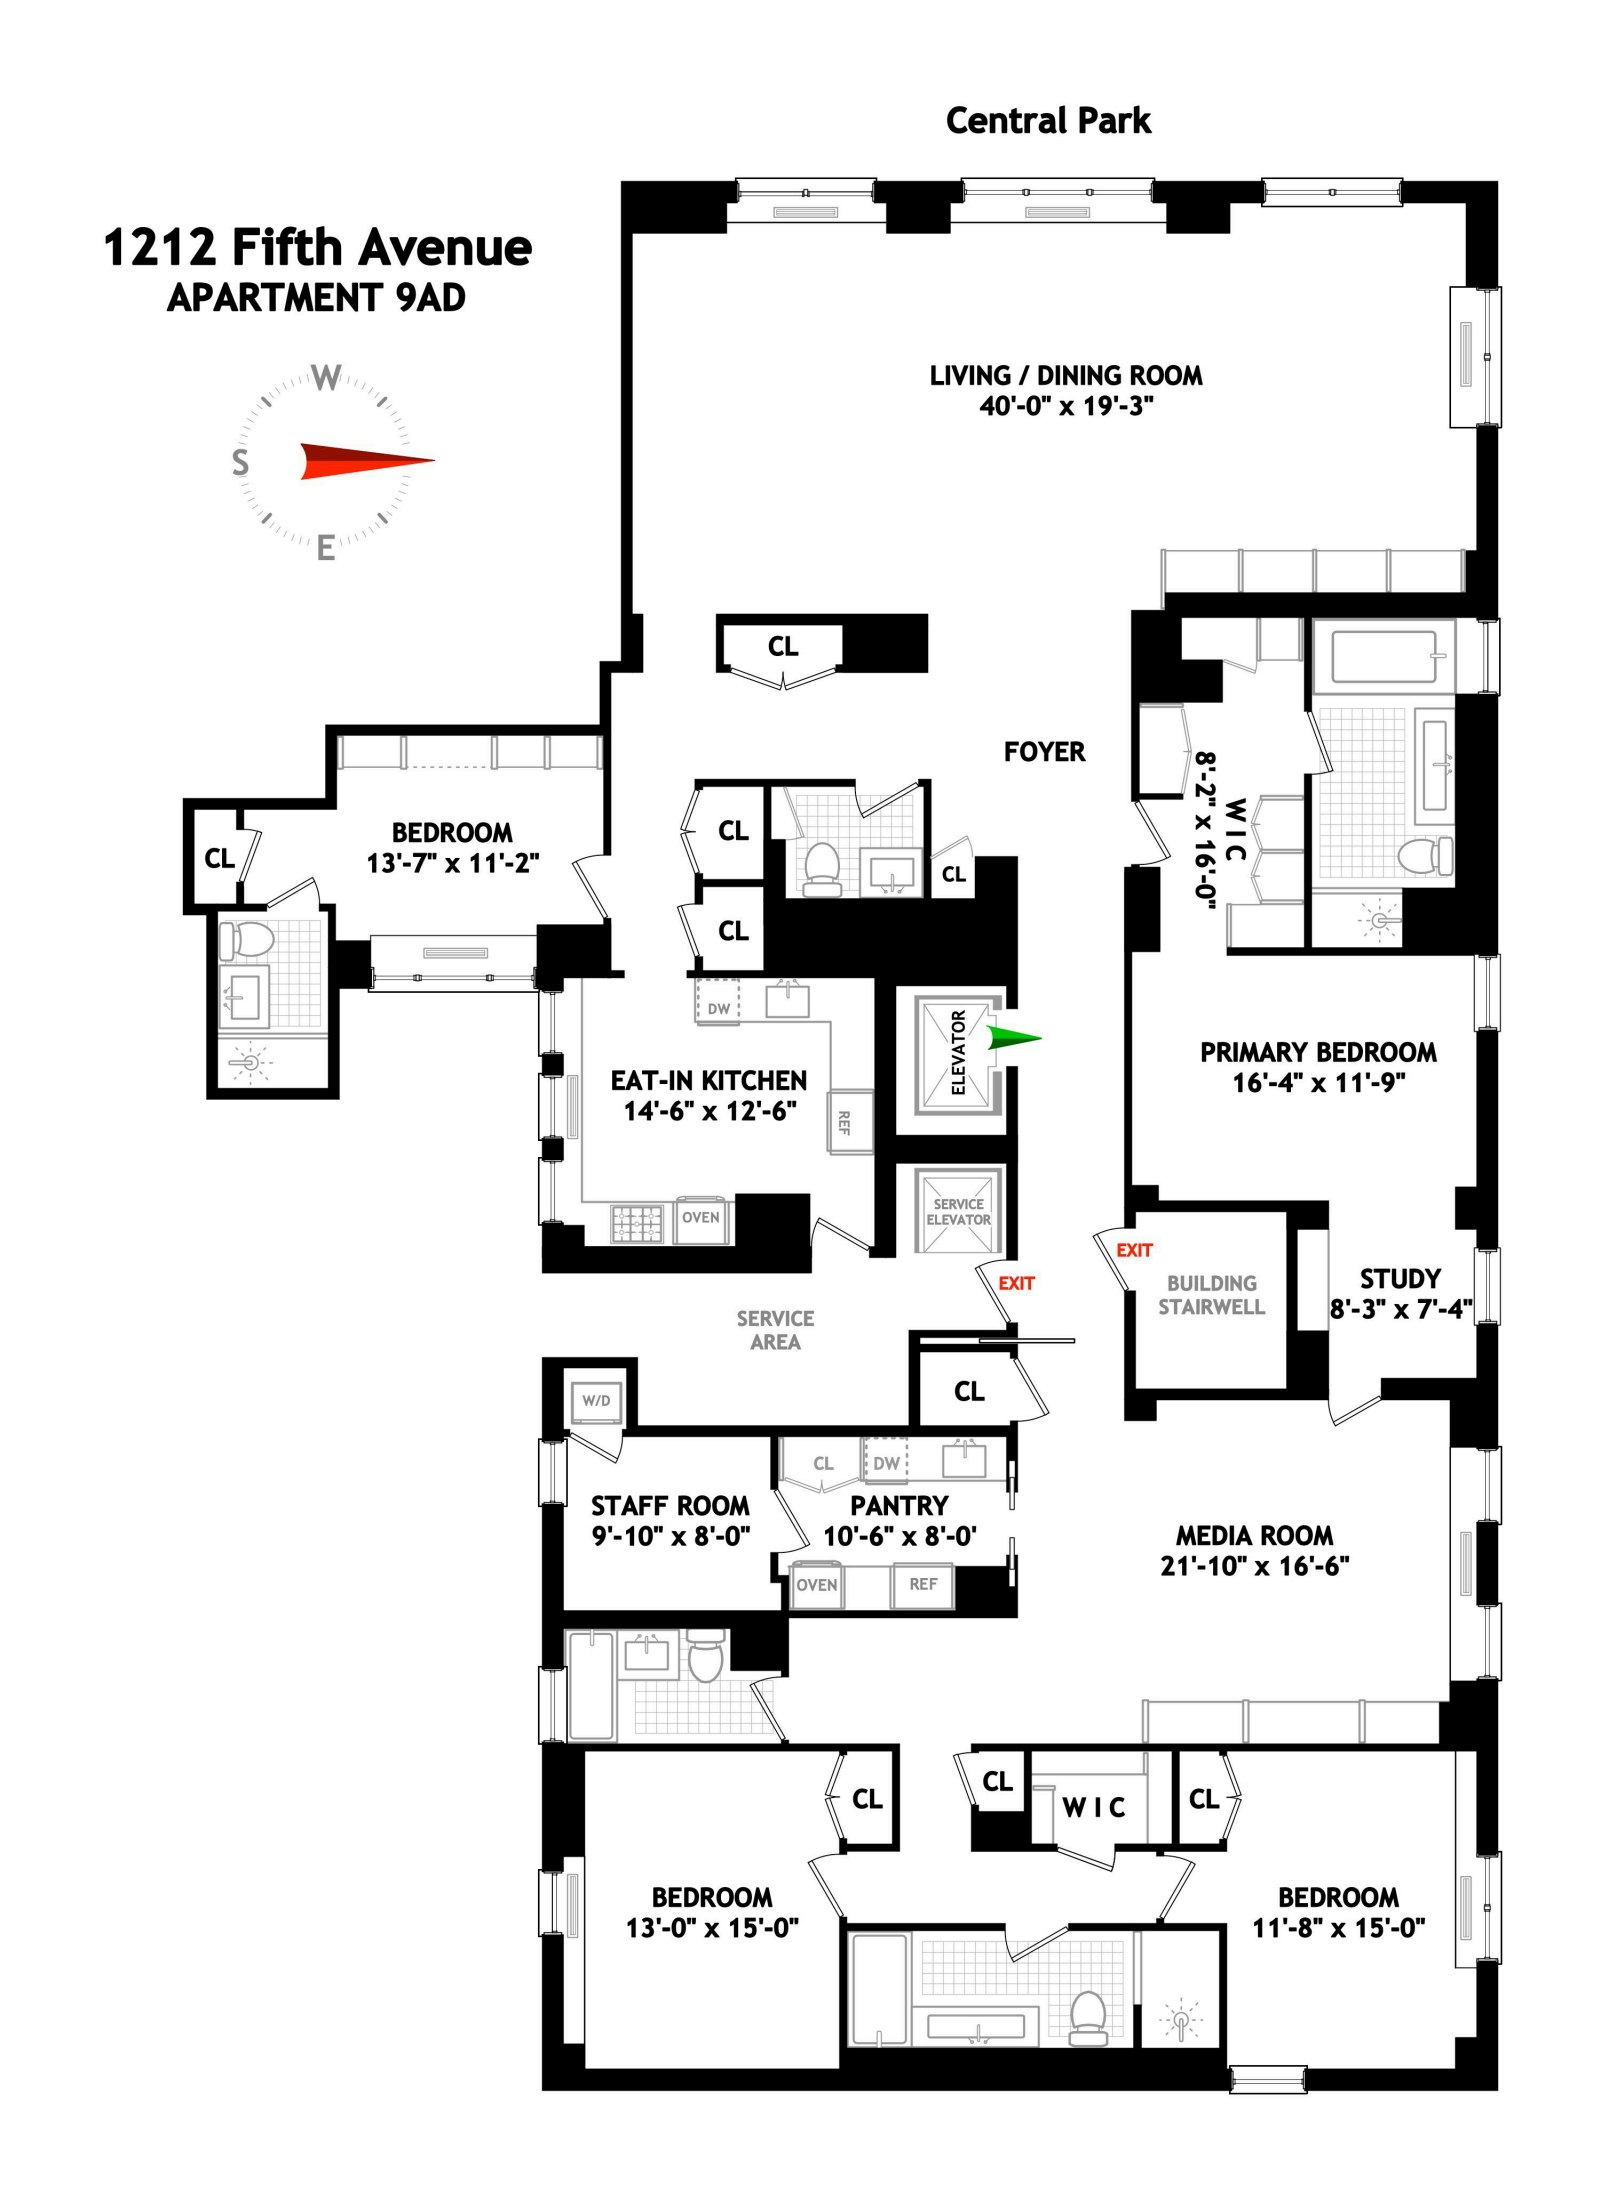 Floorplan for 1212 Fifth Avenue, 9A/D